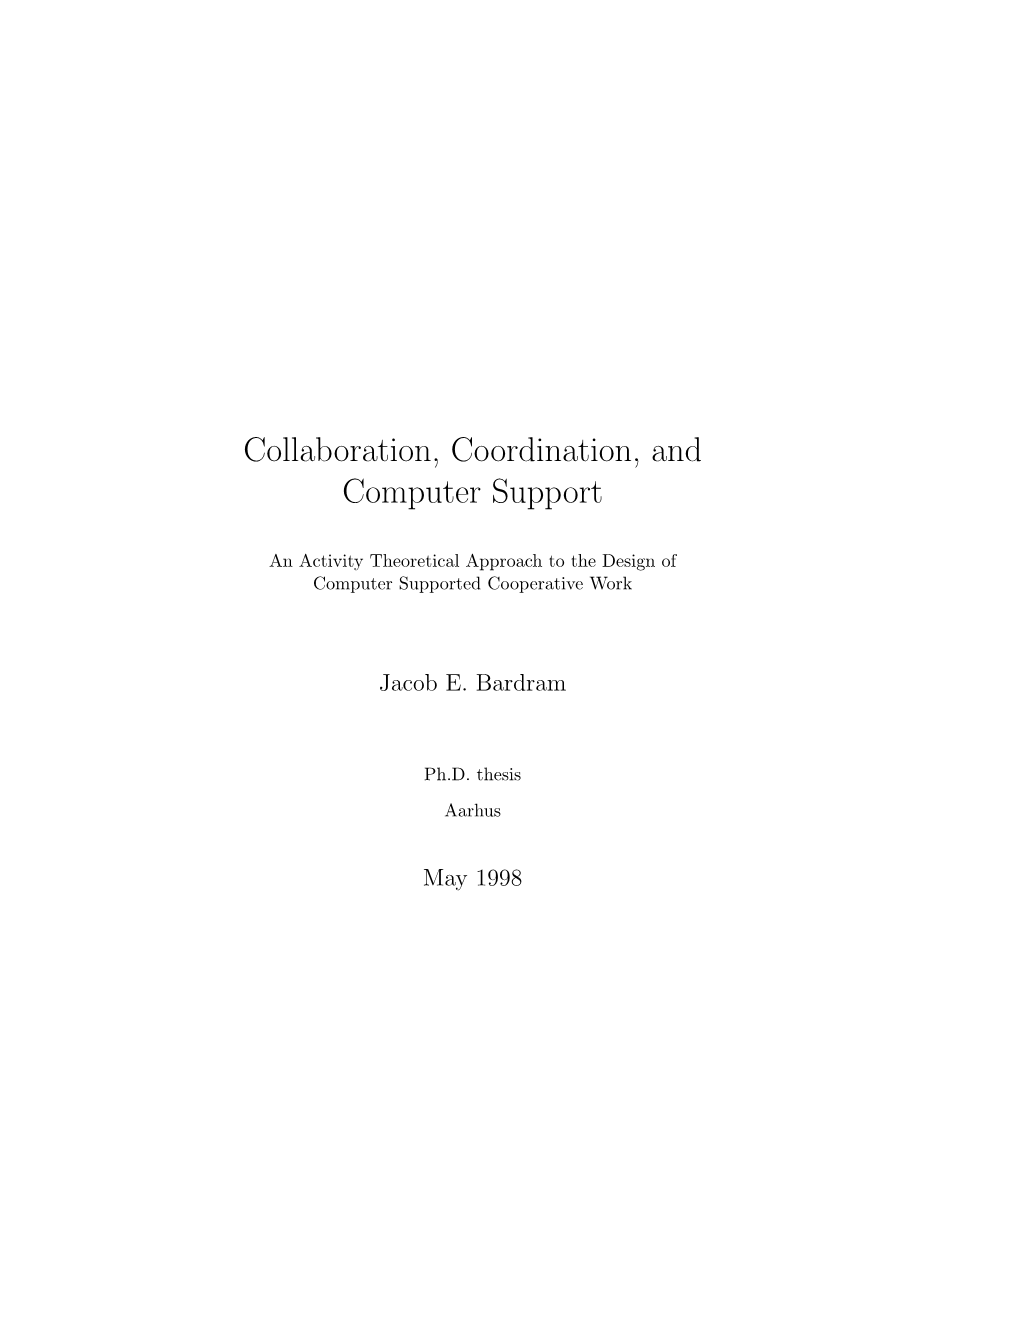 Collaboration, Coordination, and Computer Support